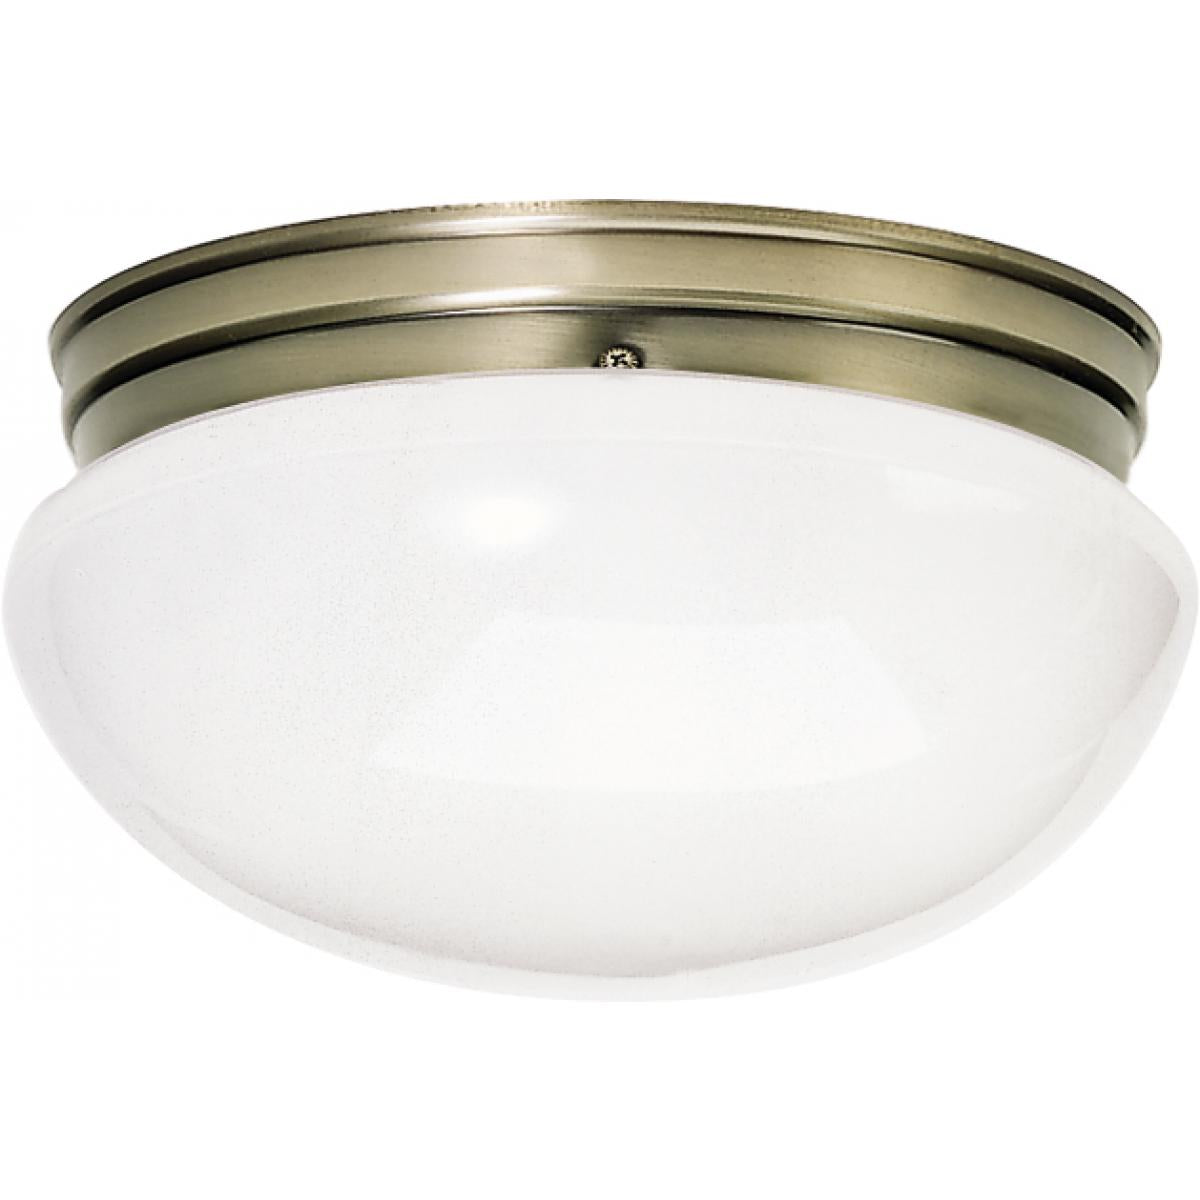 Satco 77-988 2 Light - 12" Flush Large with White Glass - Antique Brass Finish